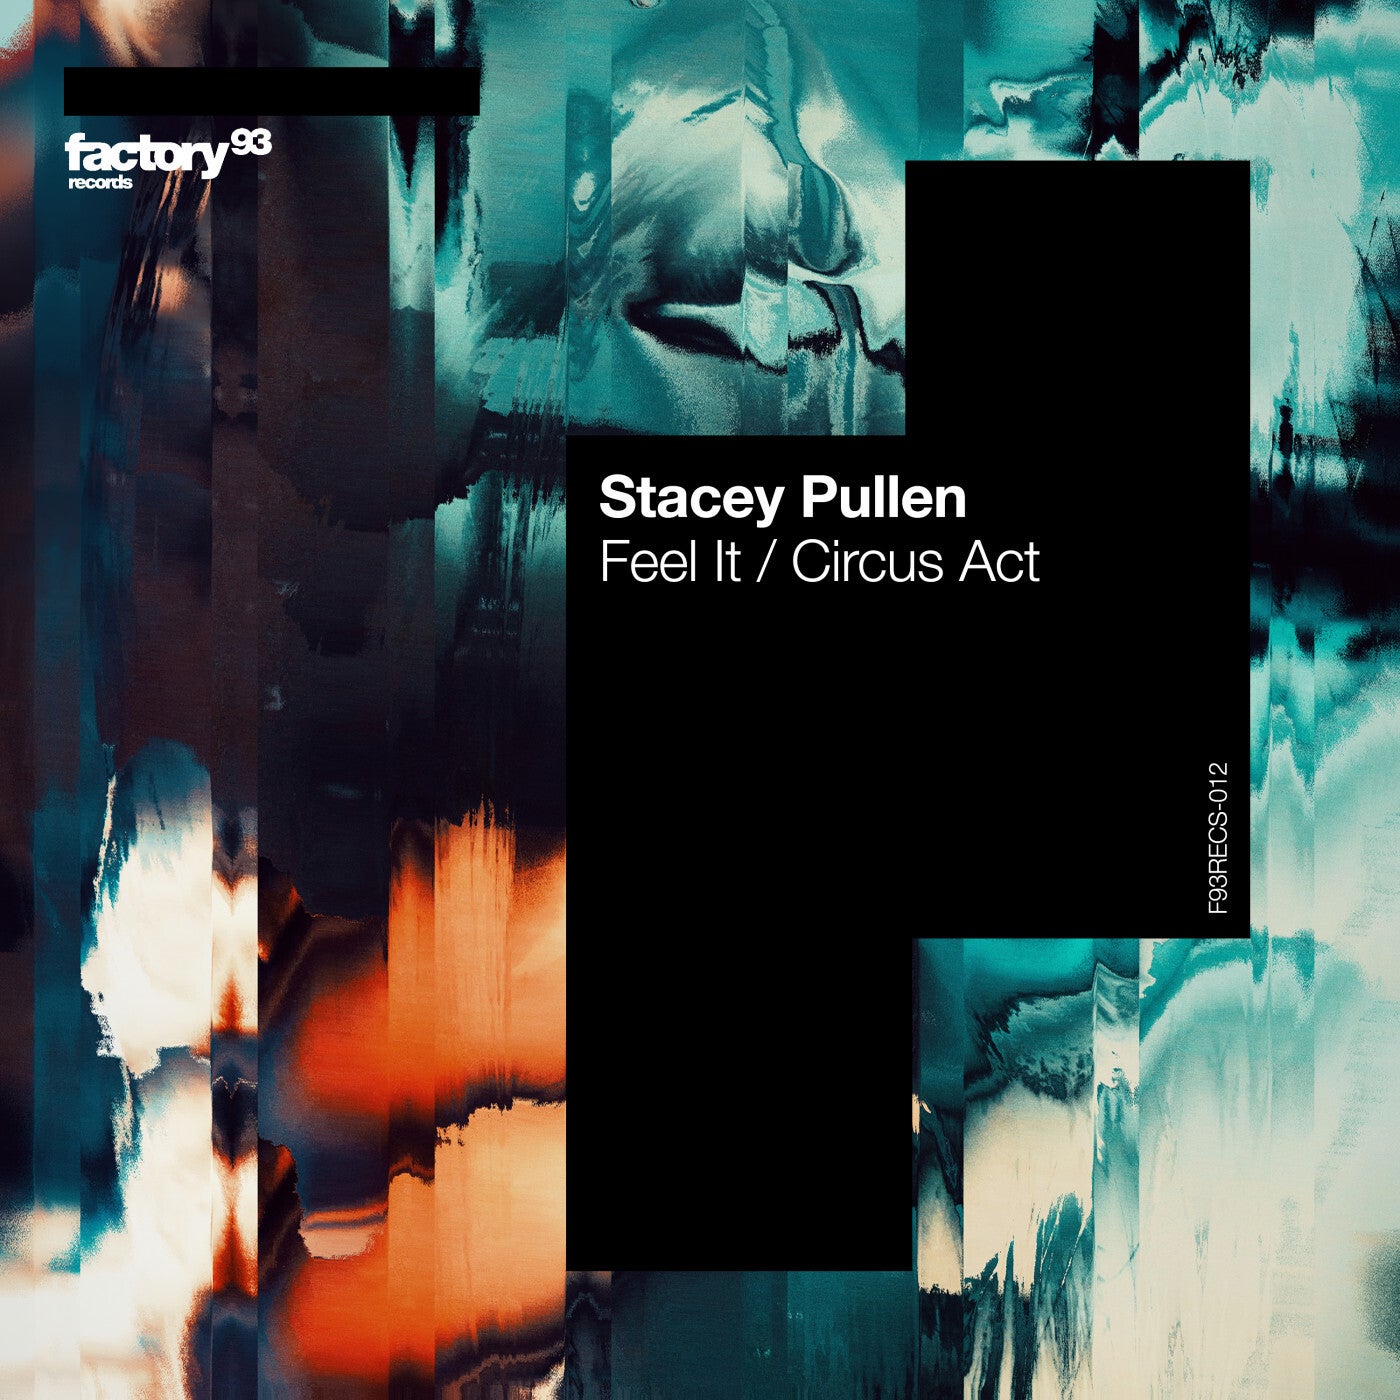 Stacey Pullen – Feel It / Circus Act [F93RECS012]